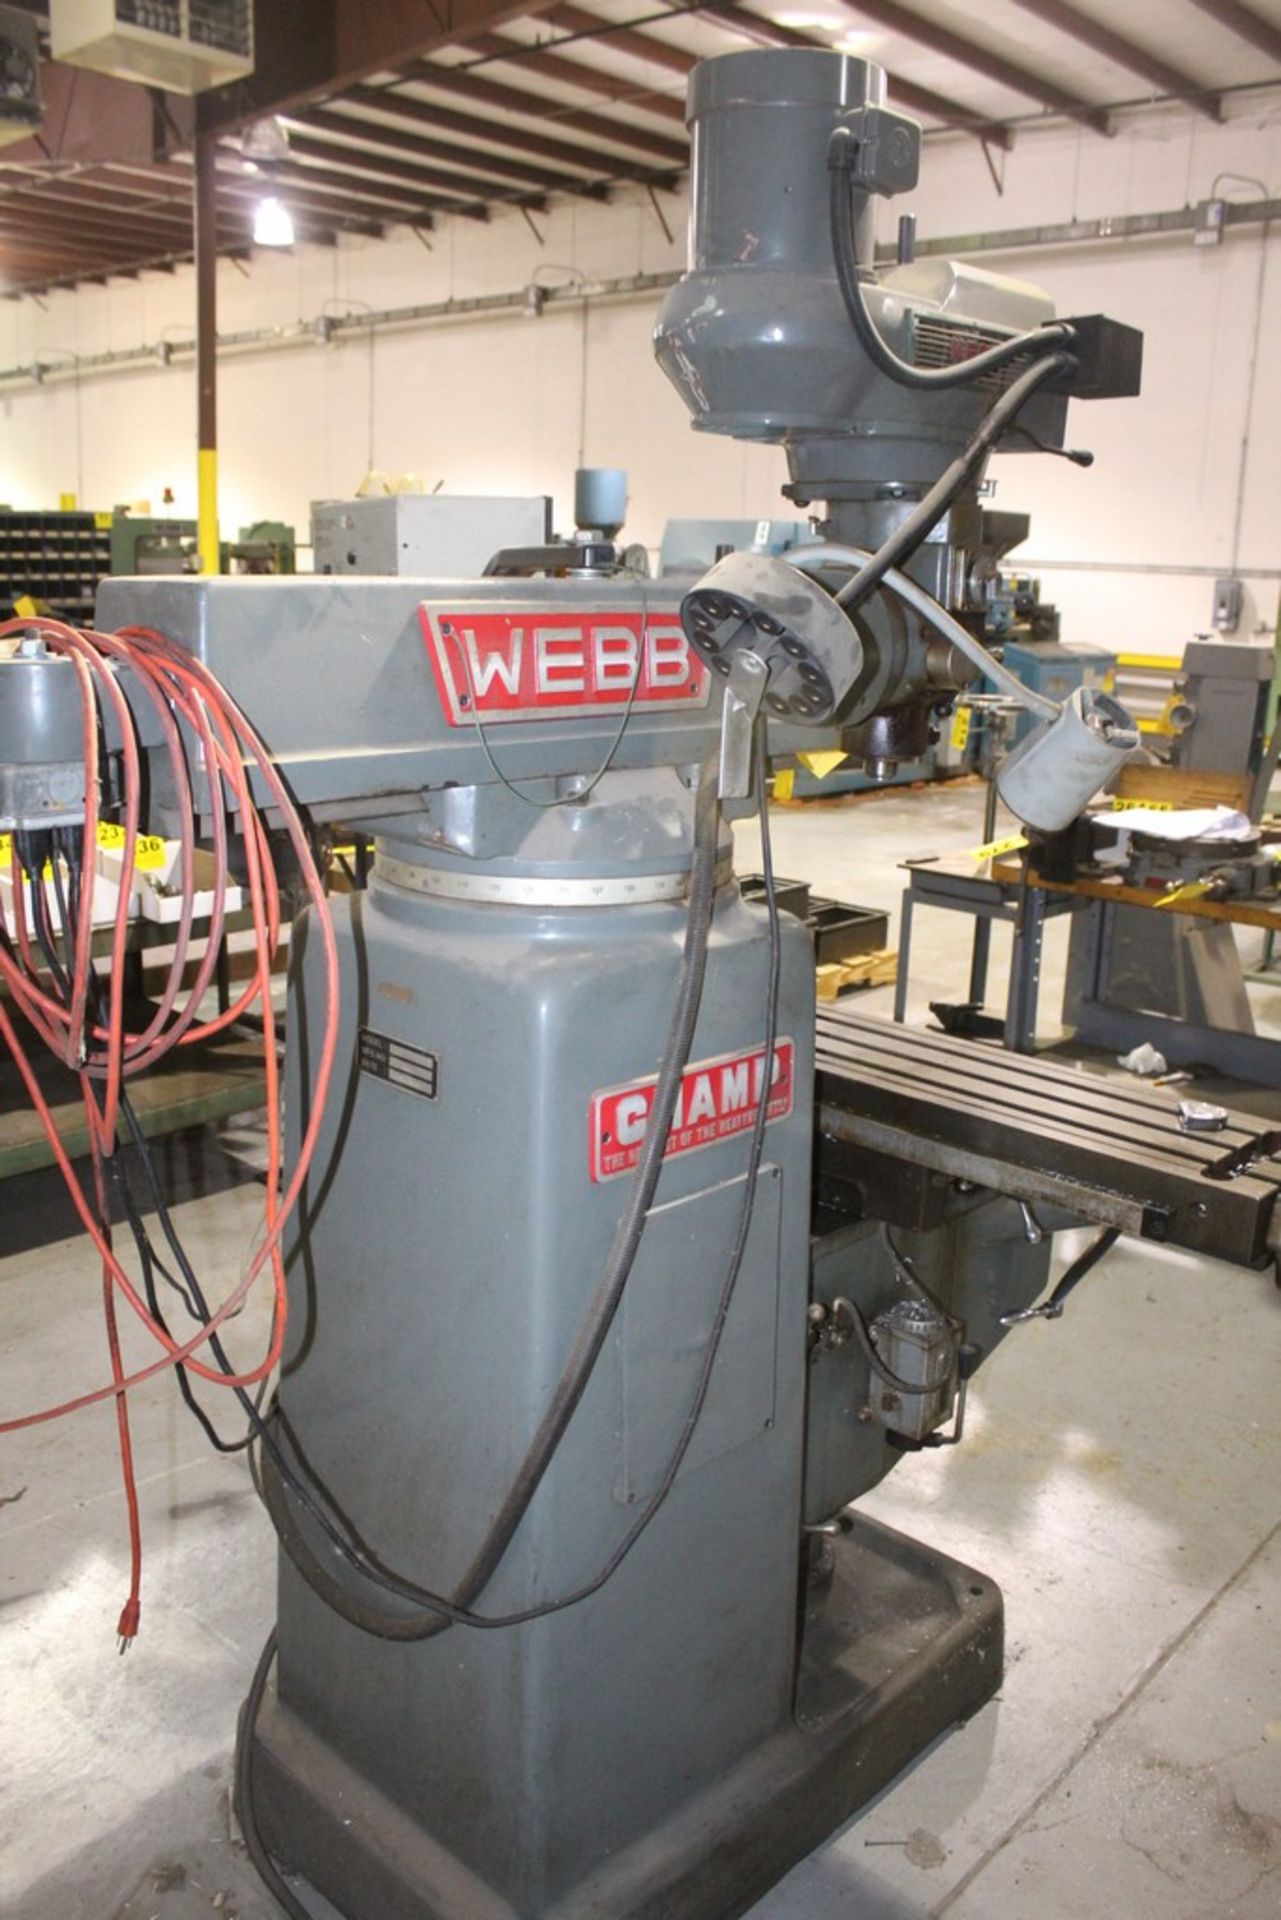 WEBB 3HP MODEL CHAMP VARIABLE SPEED RAM TYPE VERTICAL MILLING MACHINE S/N 6553 WITH 48" TABLE, - Image 5 of 6